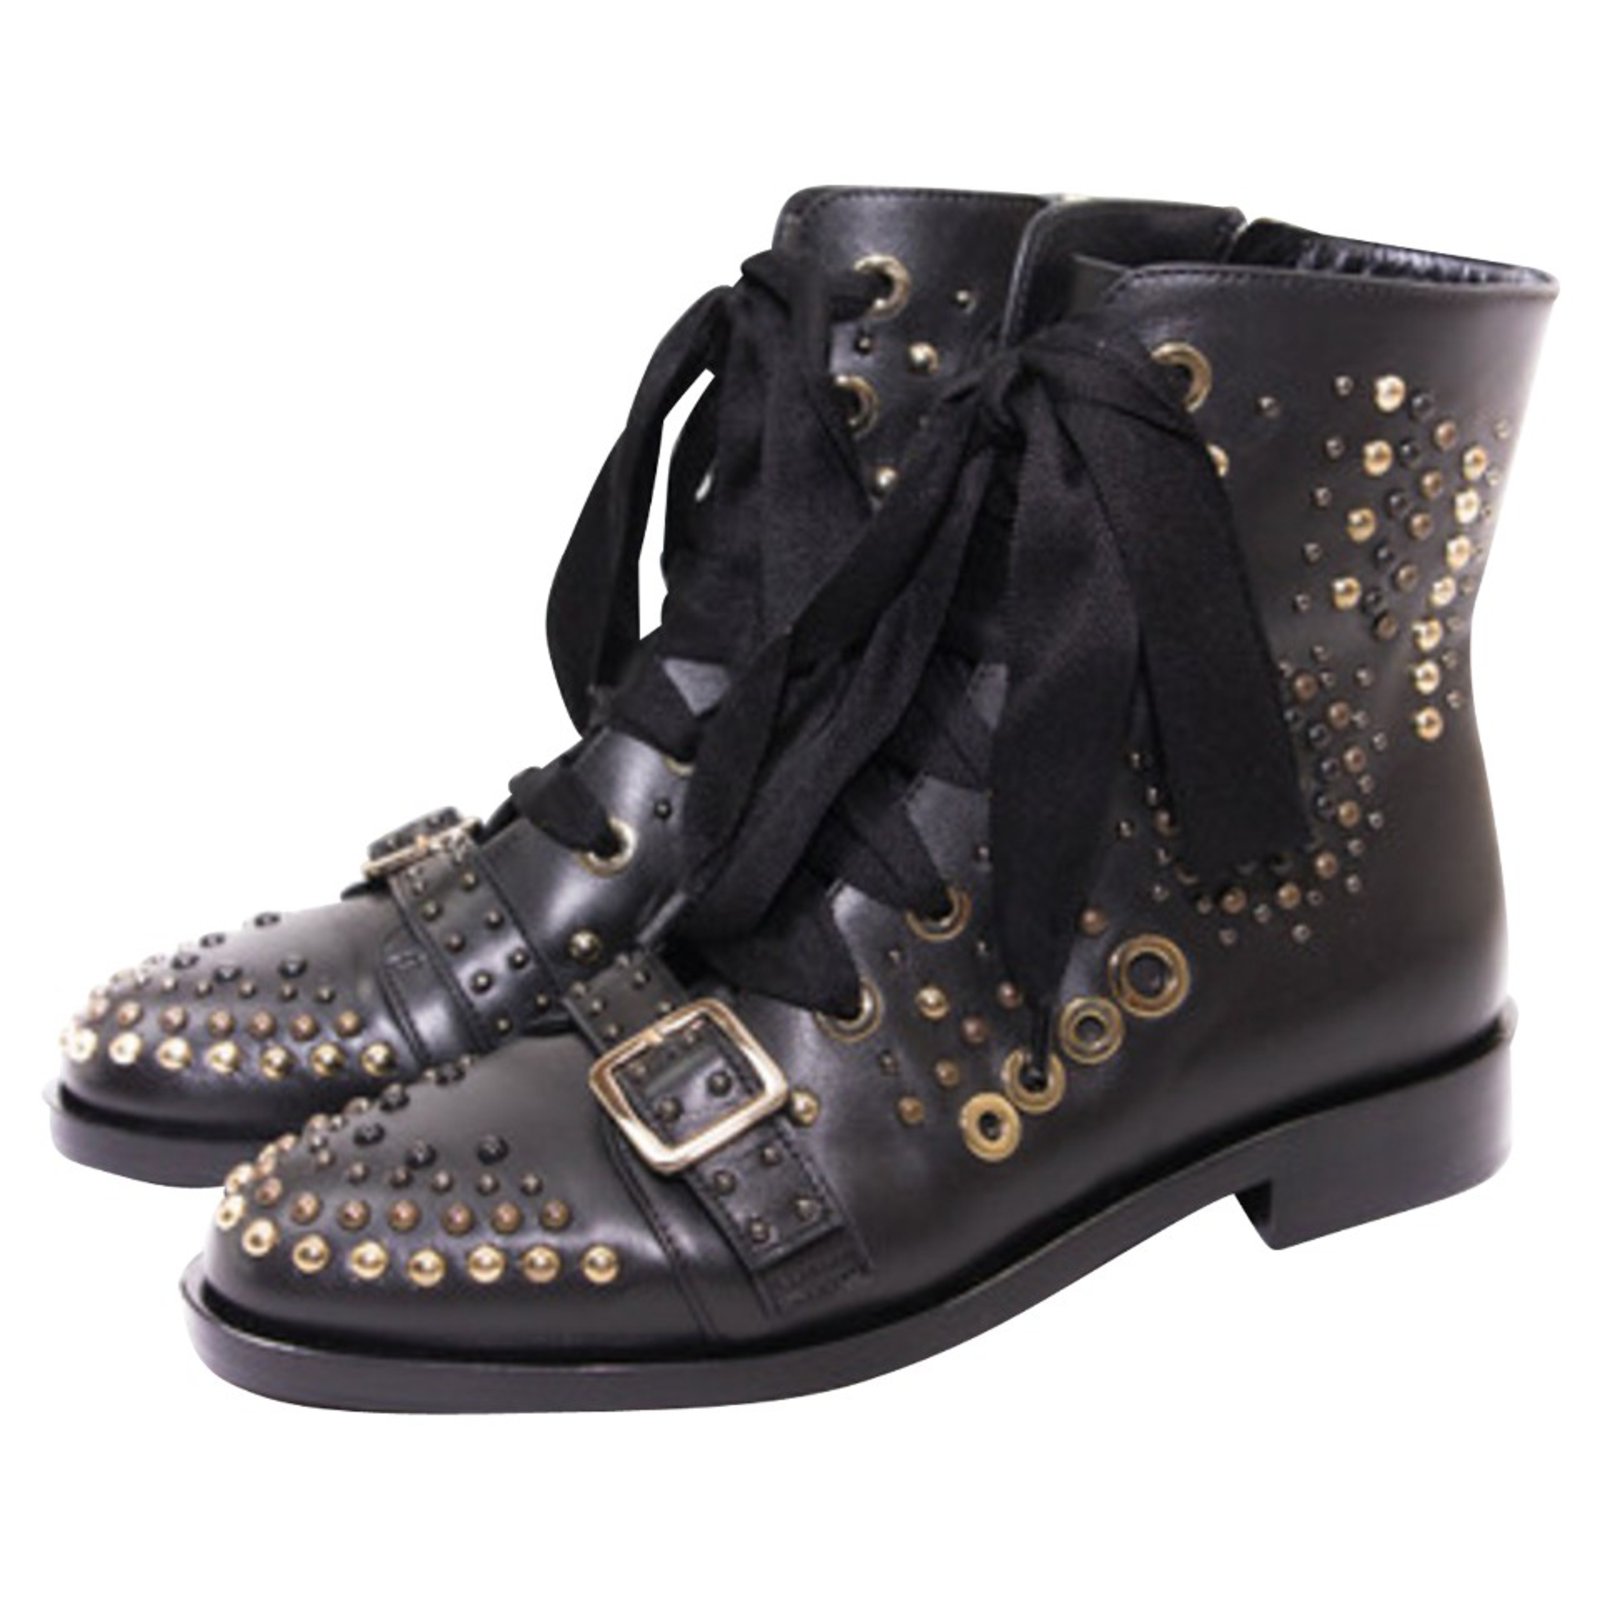 Studded black leather boots Ankle Boots 